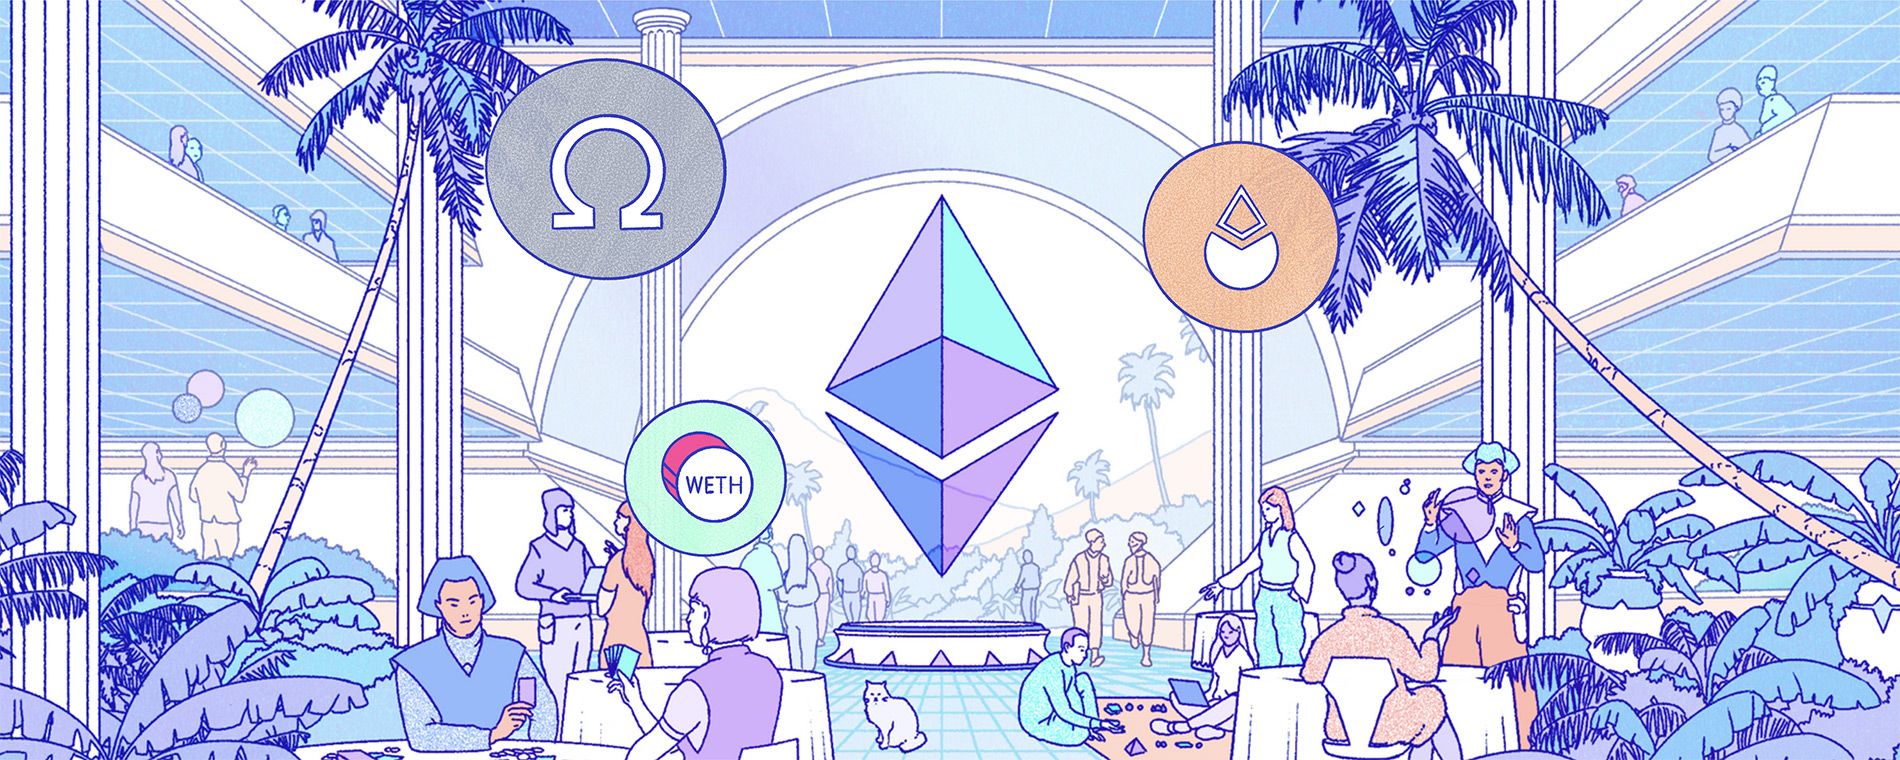 Are ETH and WETH different from each other?